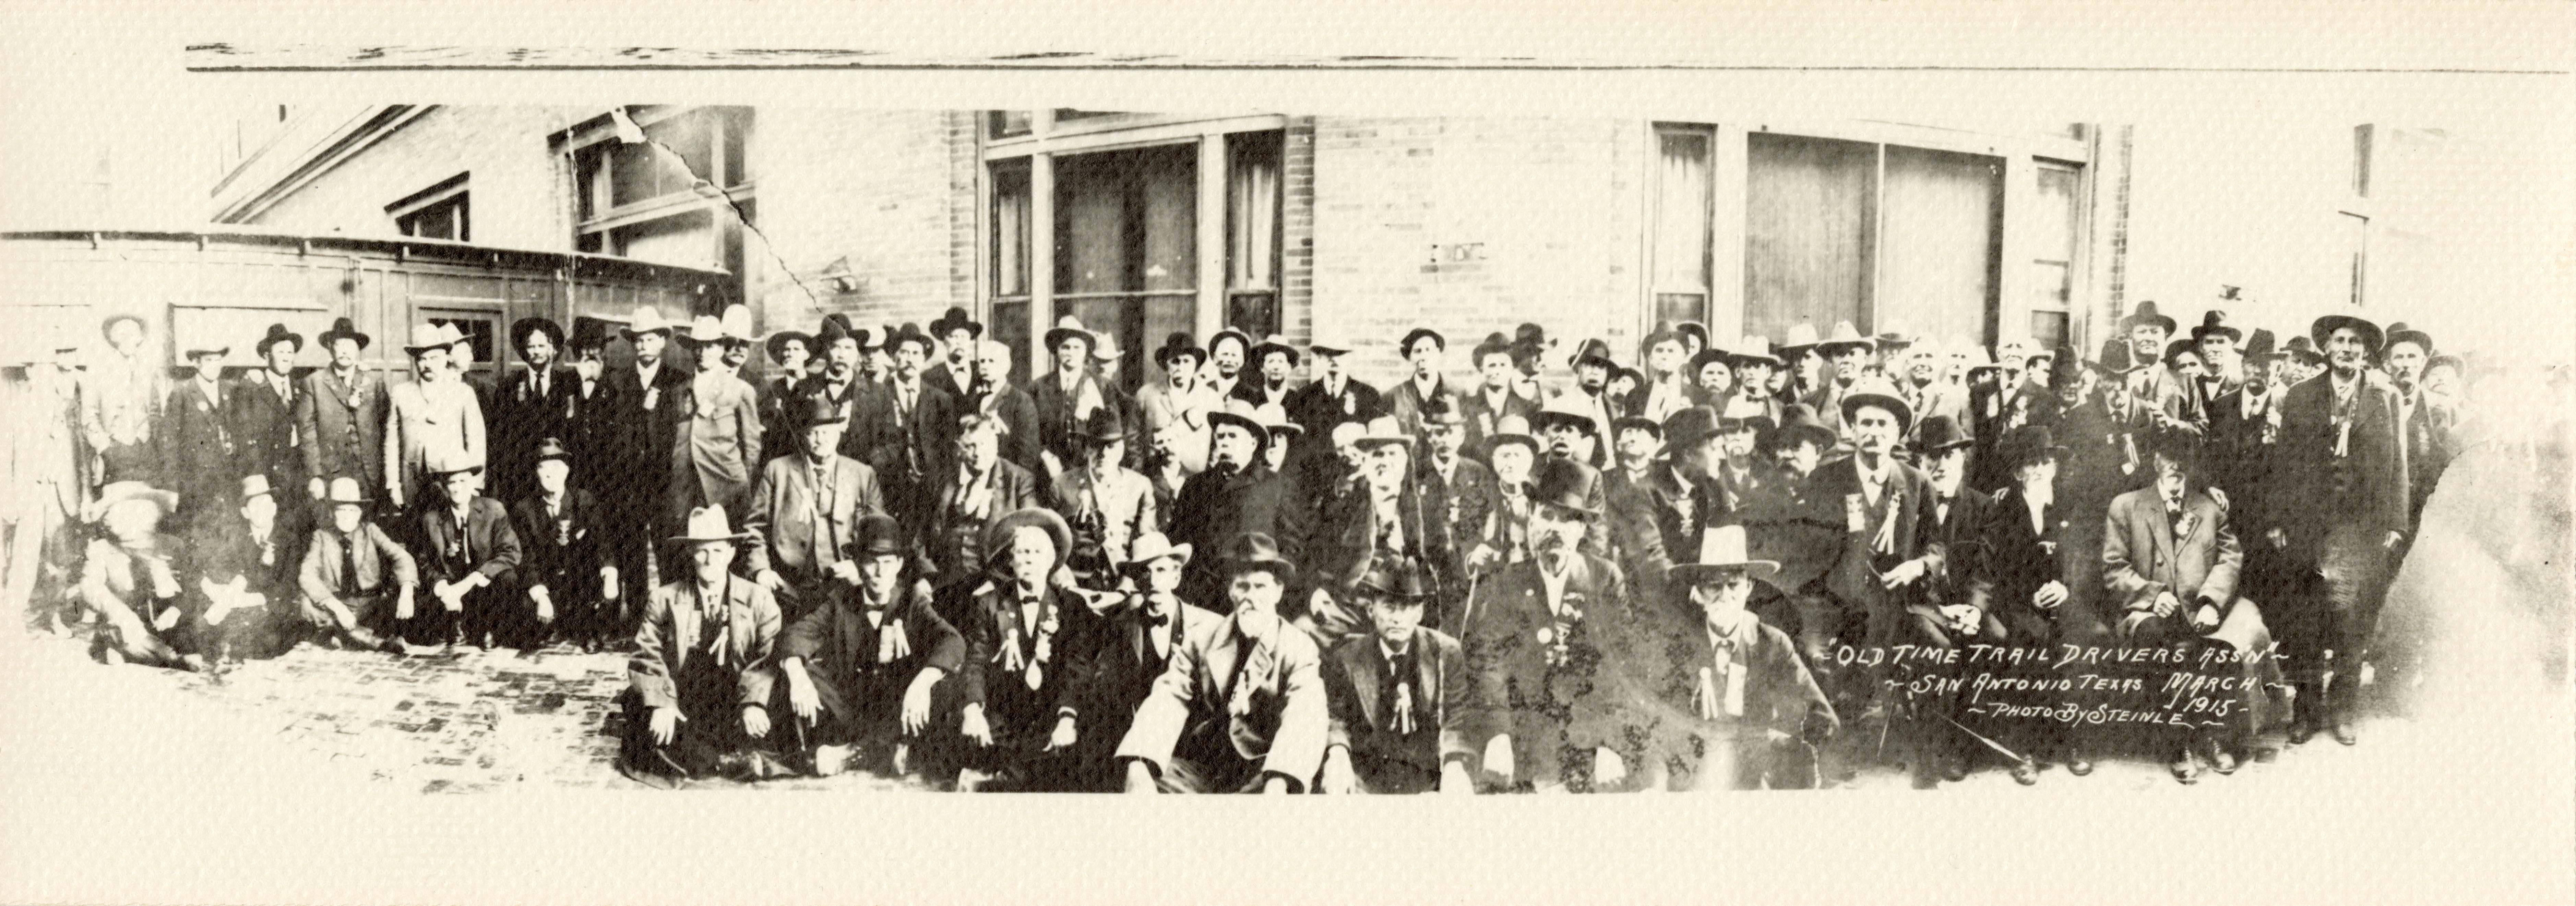 Old time trail drivers assn., San Antonio, Texas, March 1915